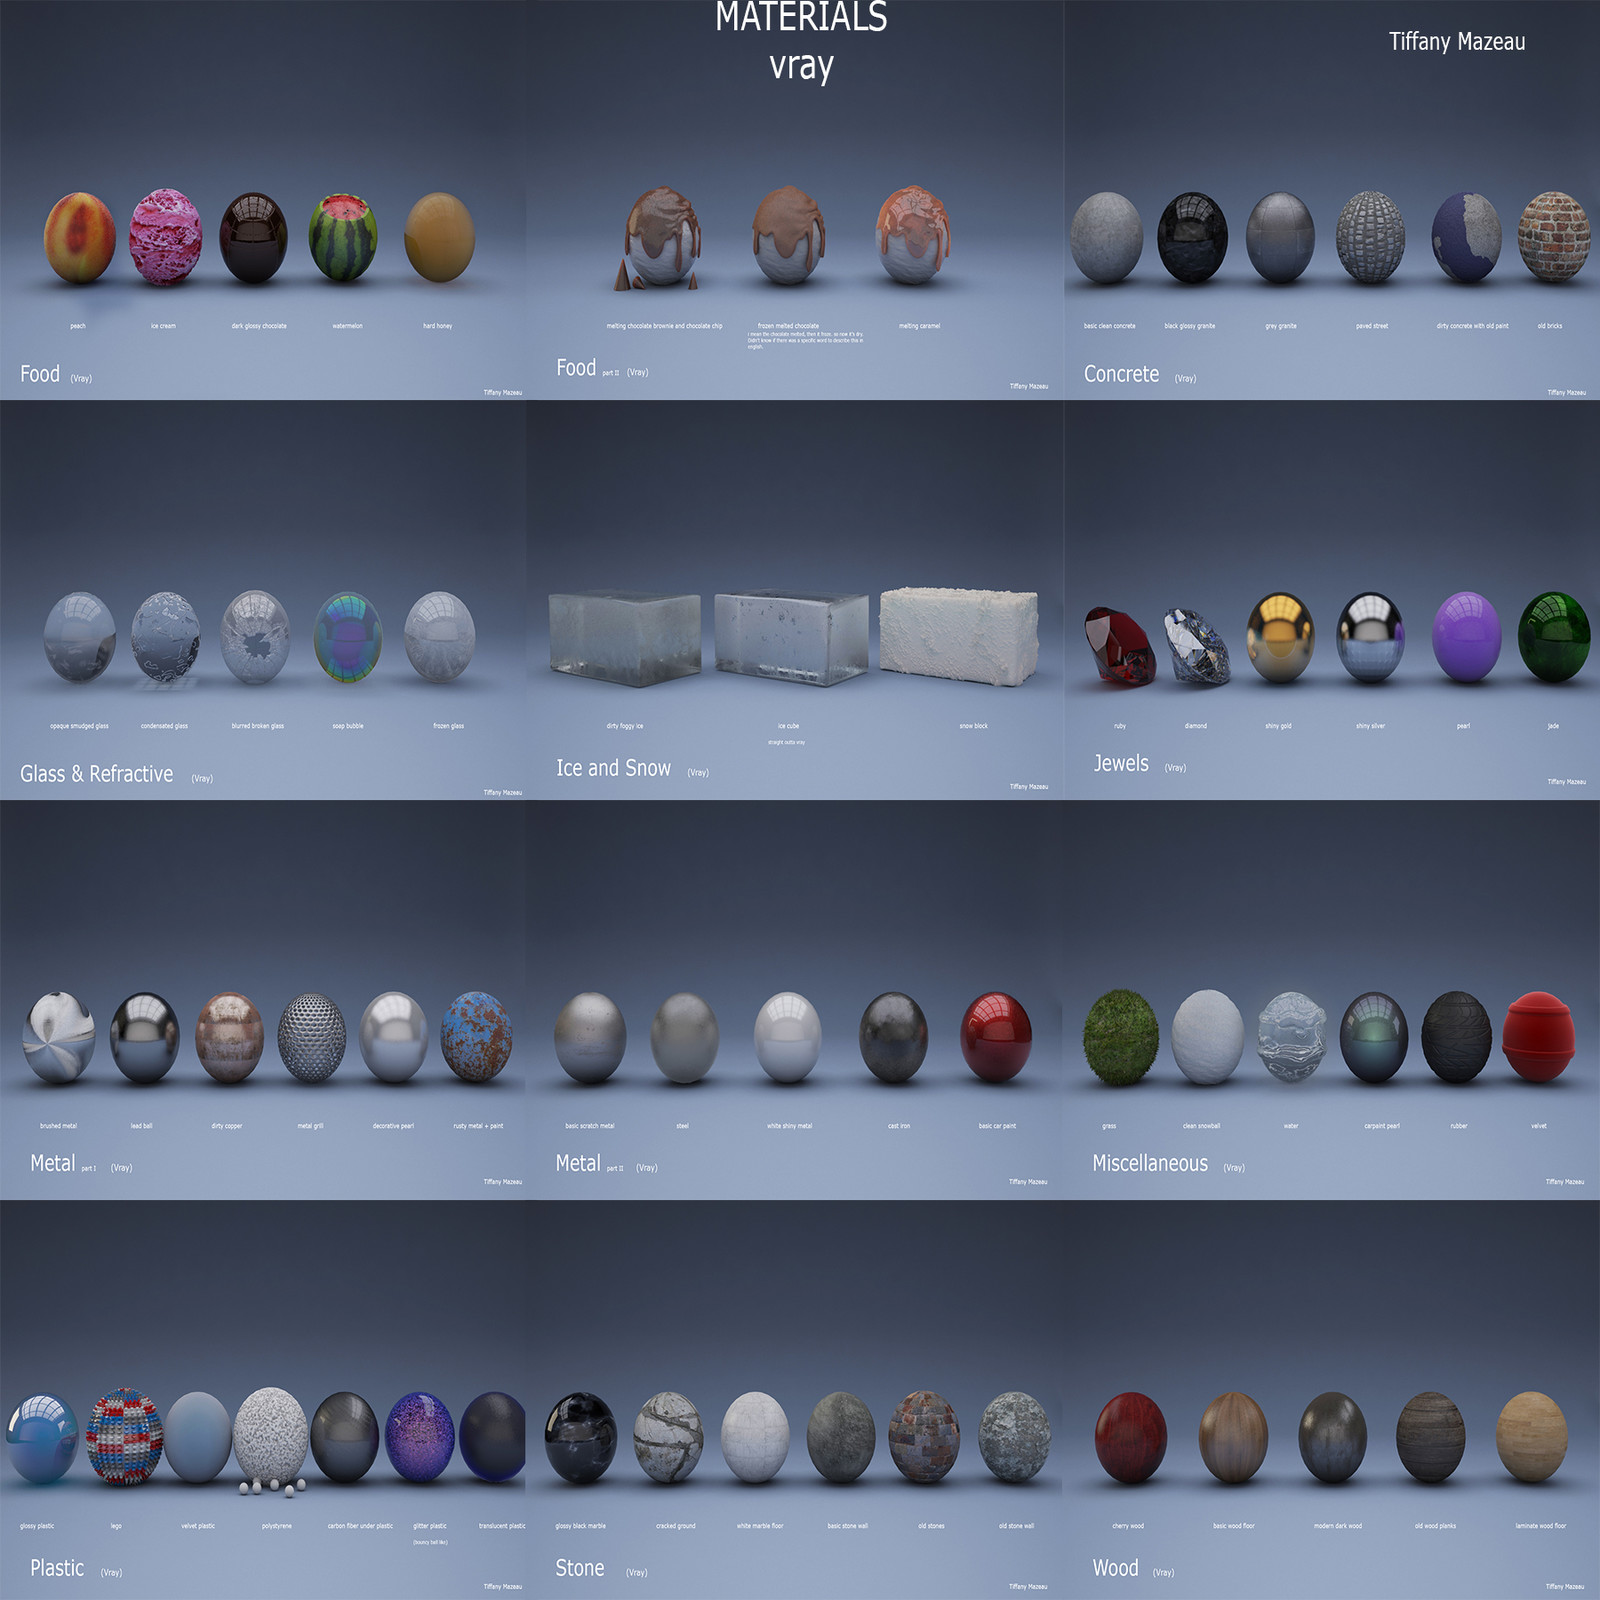 vray 3ds max material